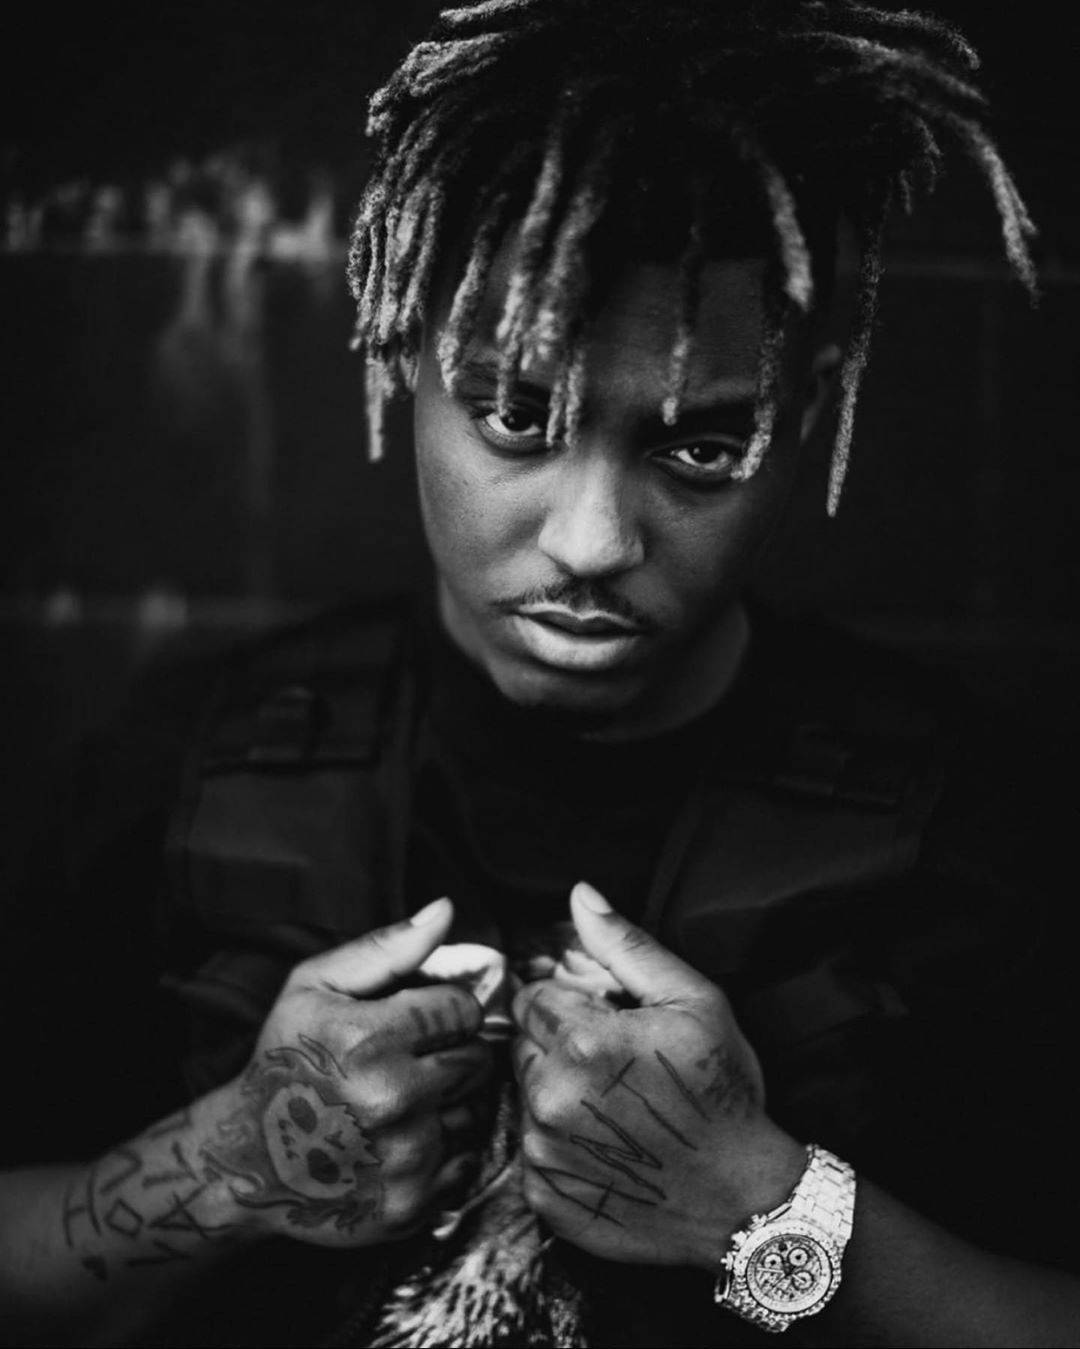 A Retro Look At The Music Of Juice Wrld